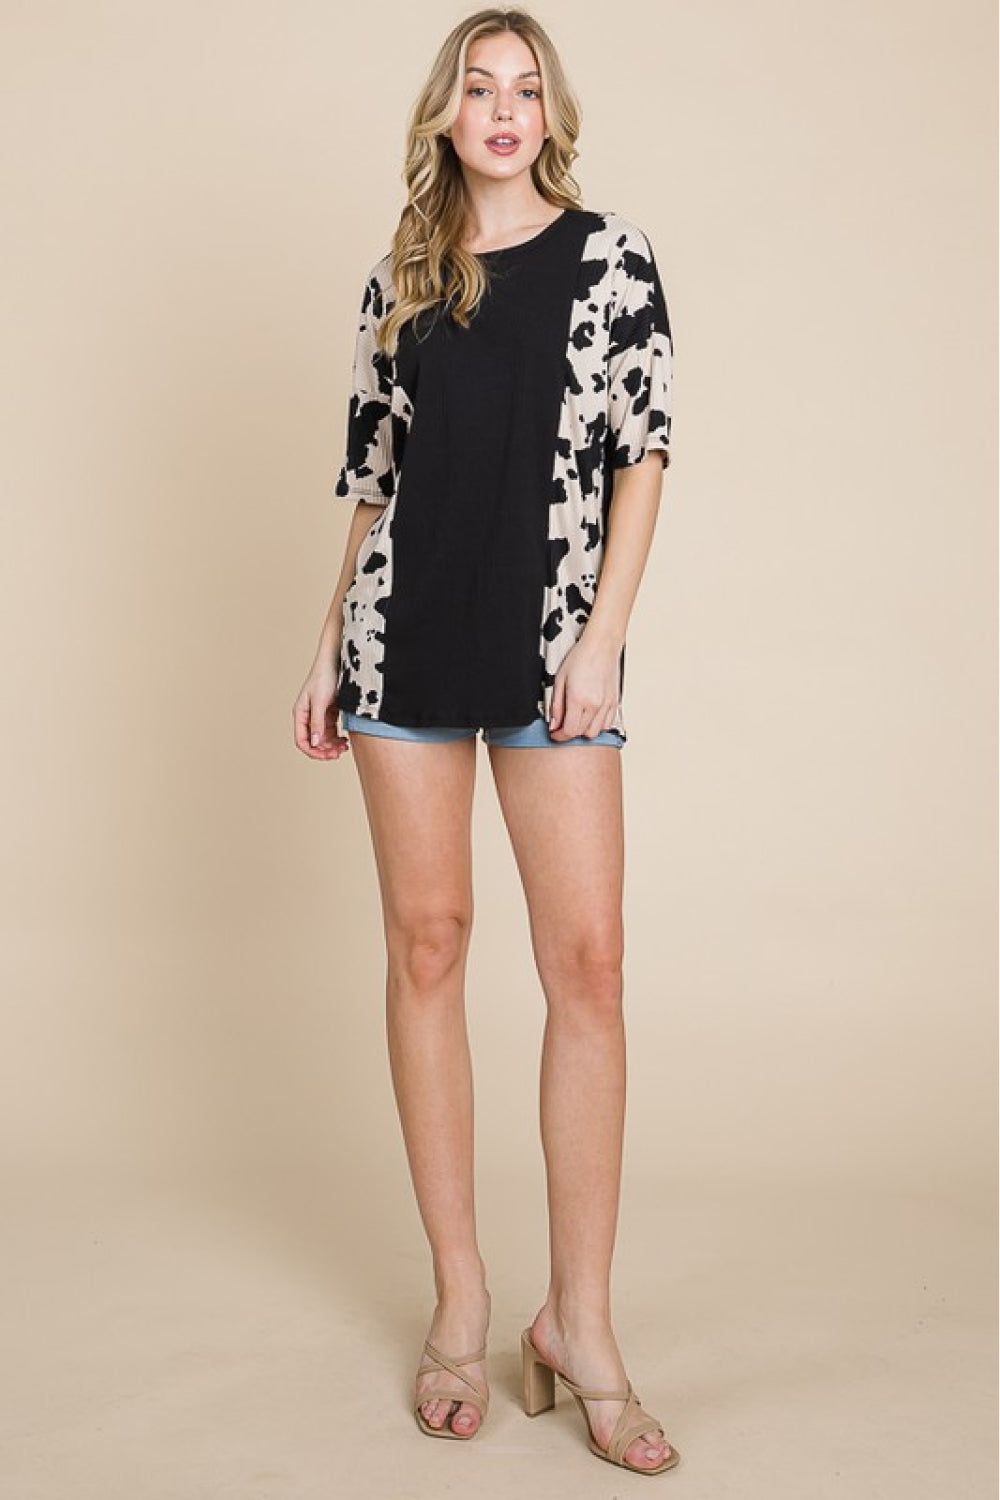 BOMBOM Rodeo Love Ribbed Animal Contrast Tee - Ships from The US - women's shirts at TFC&H Co.